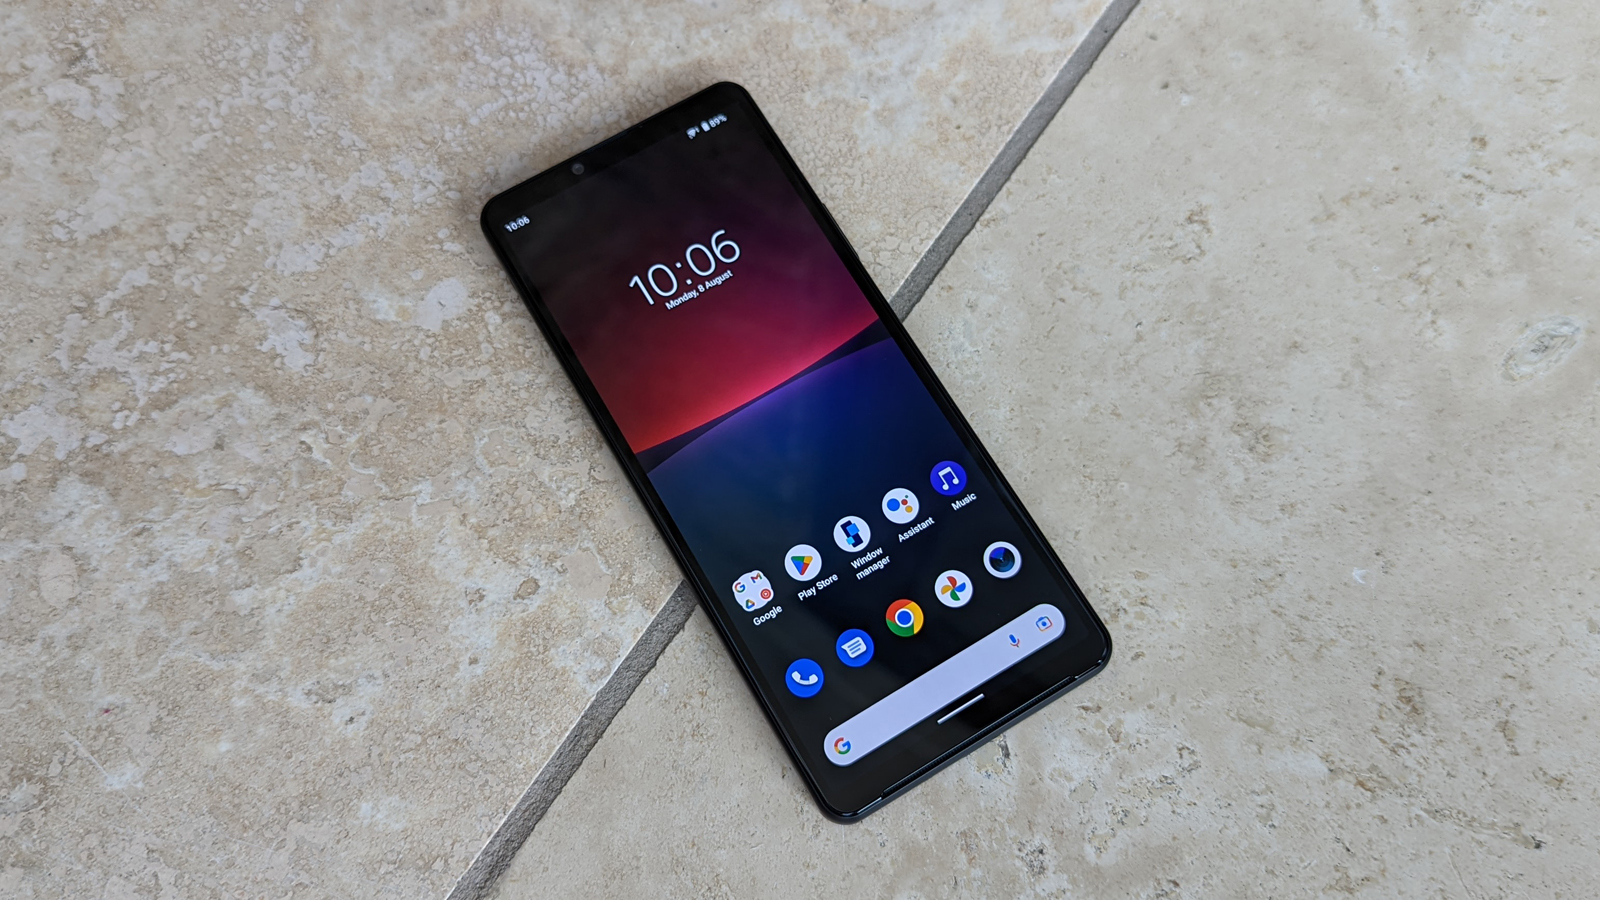 The Sony Xperia 10 IV in black face up on a tiled floor